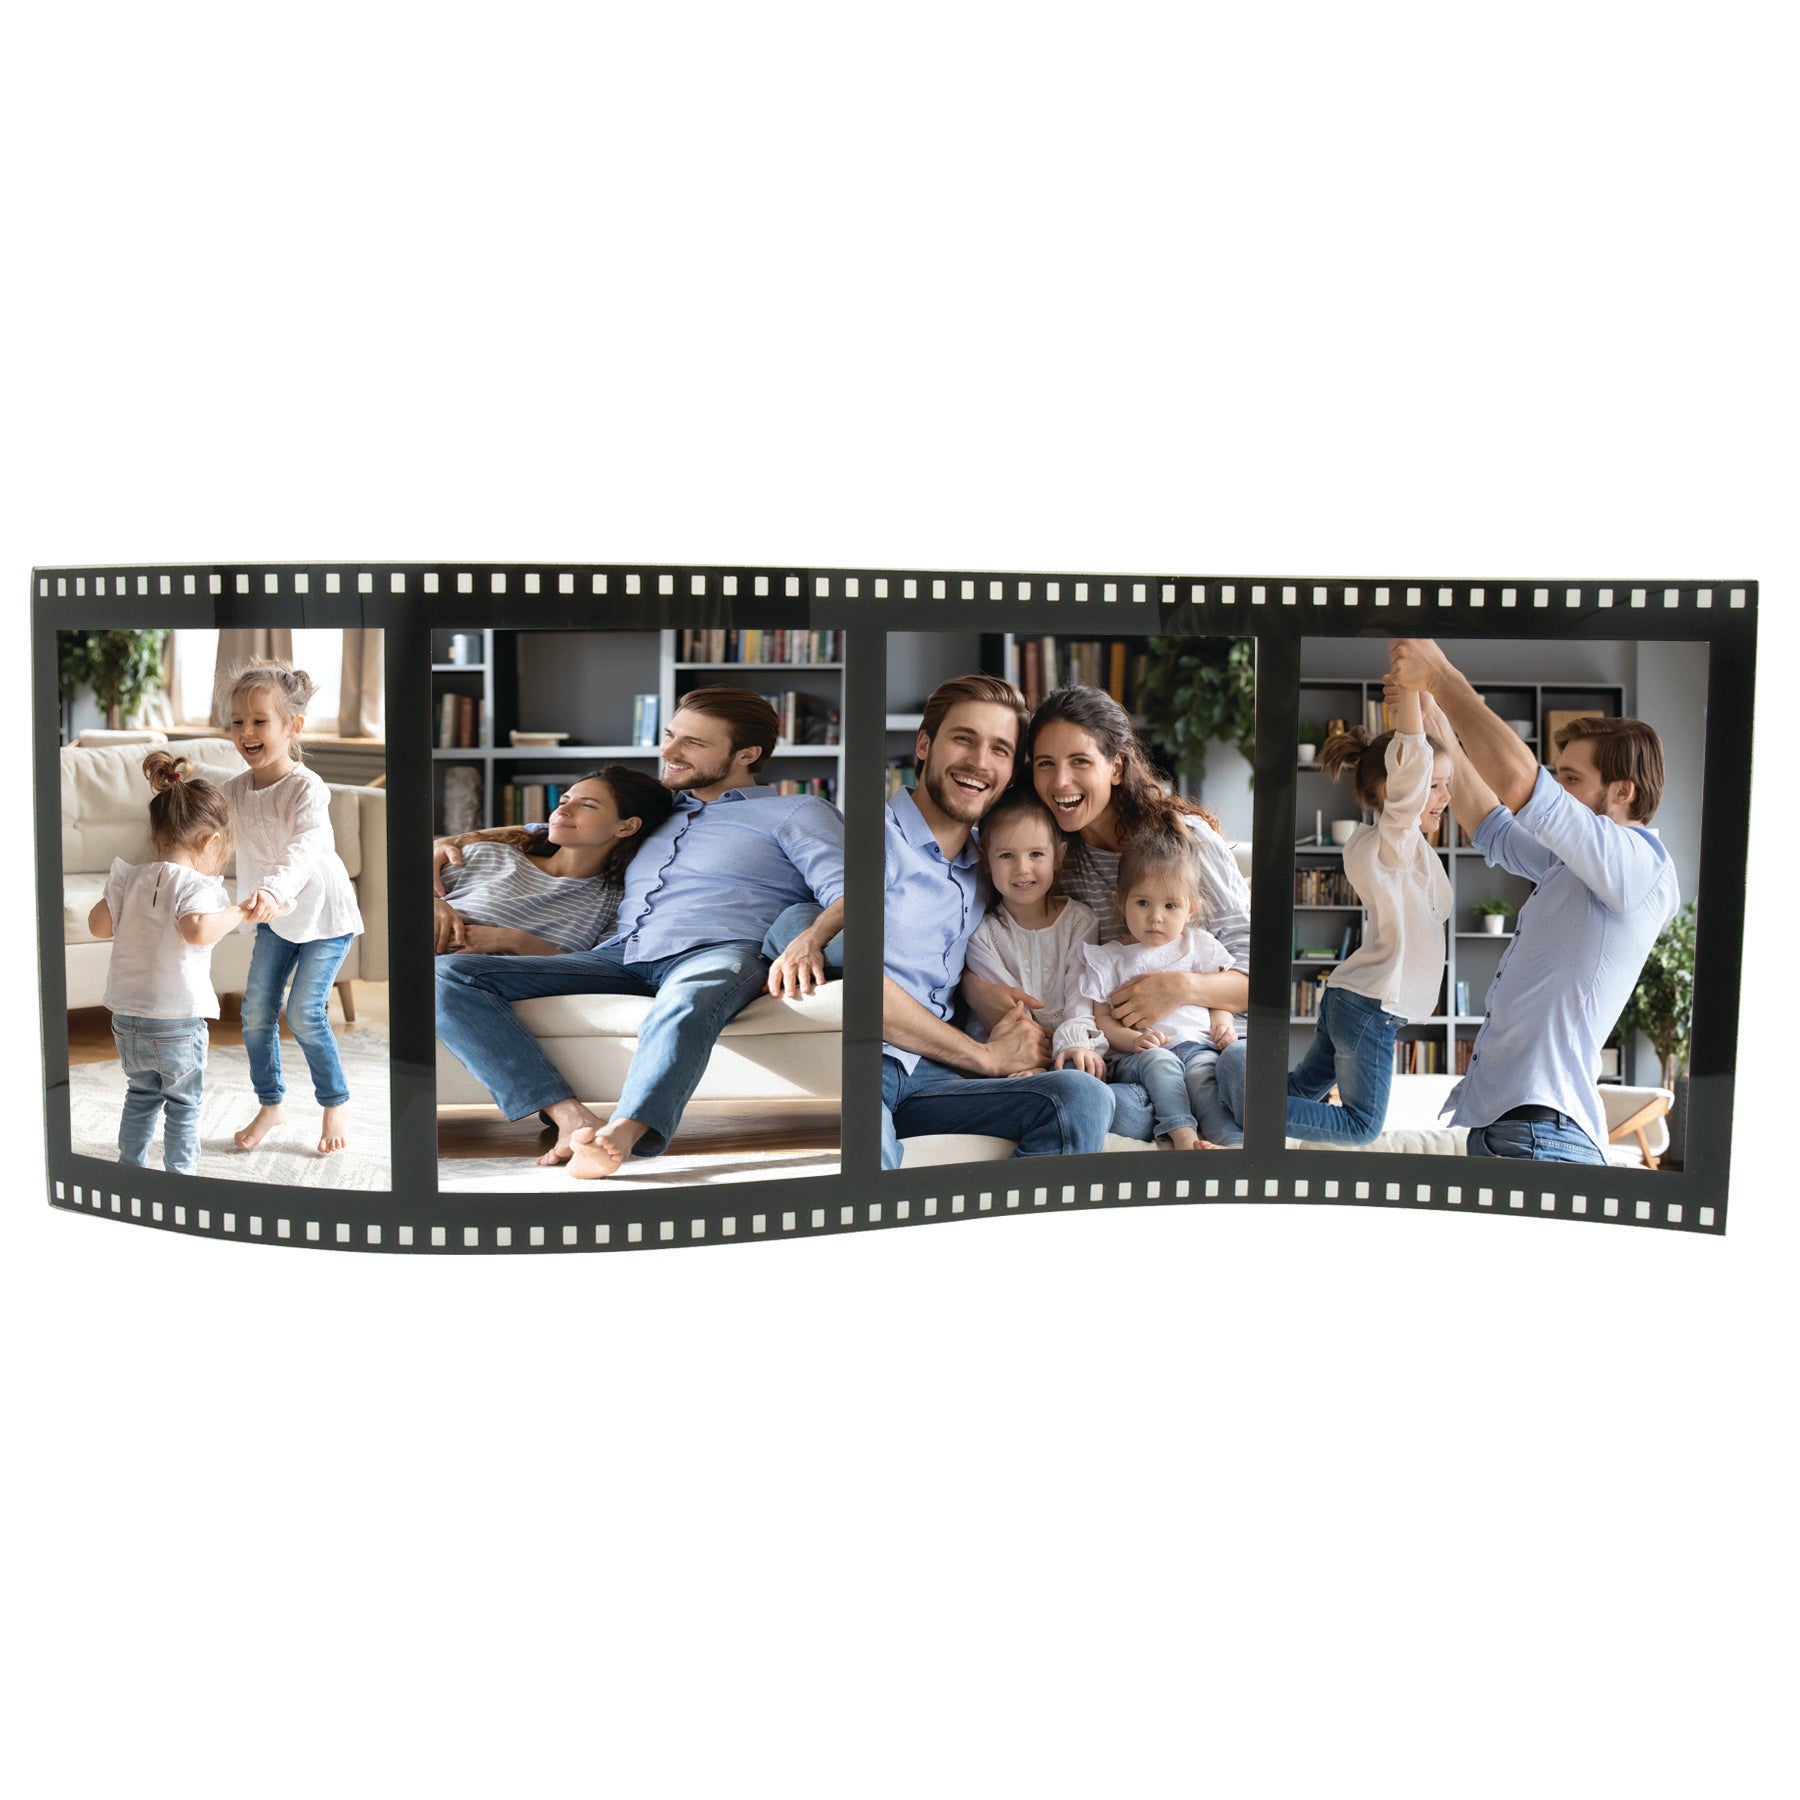 Photo Booth Frames - 6x4 Clear Acrylic Self Standing Double Picture Frame 4x6 or 6x4 Acrylic Photo Frame (6 Pack)